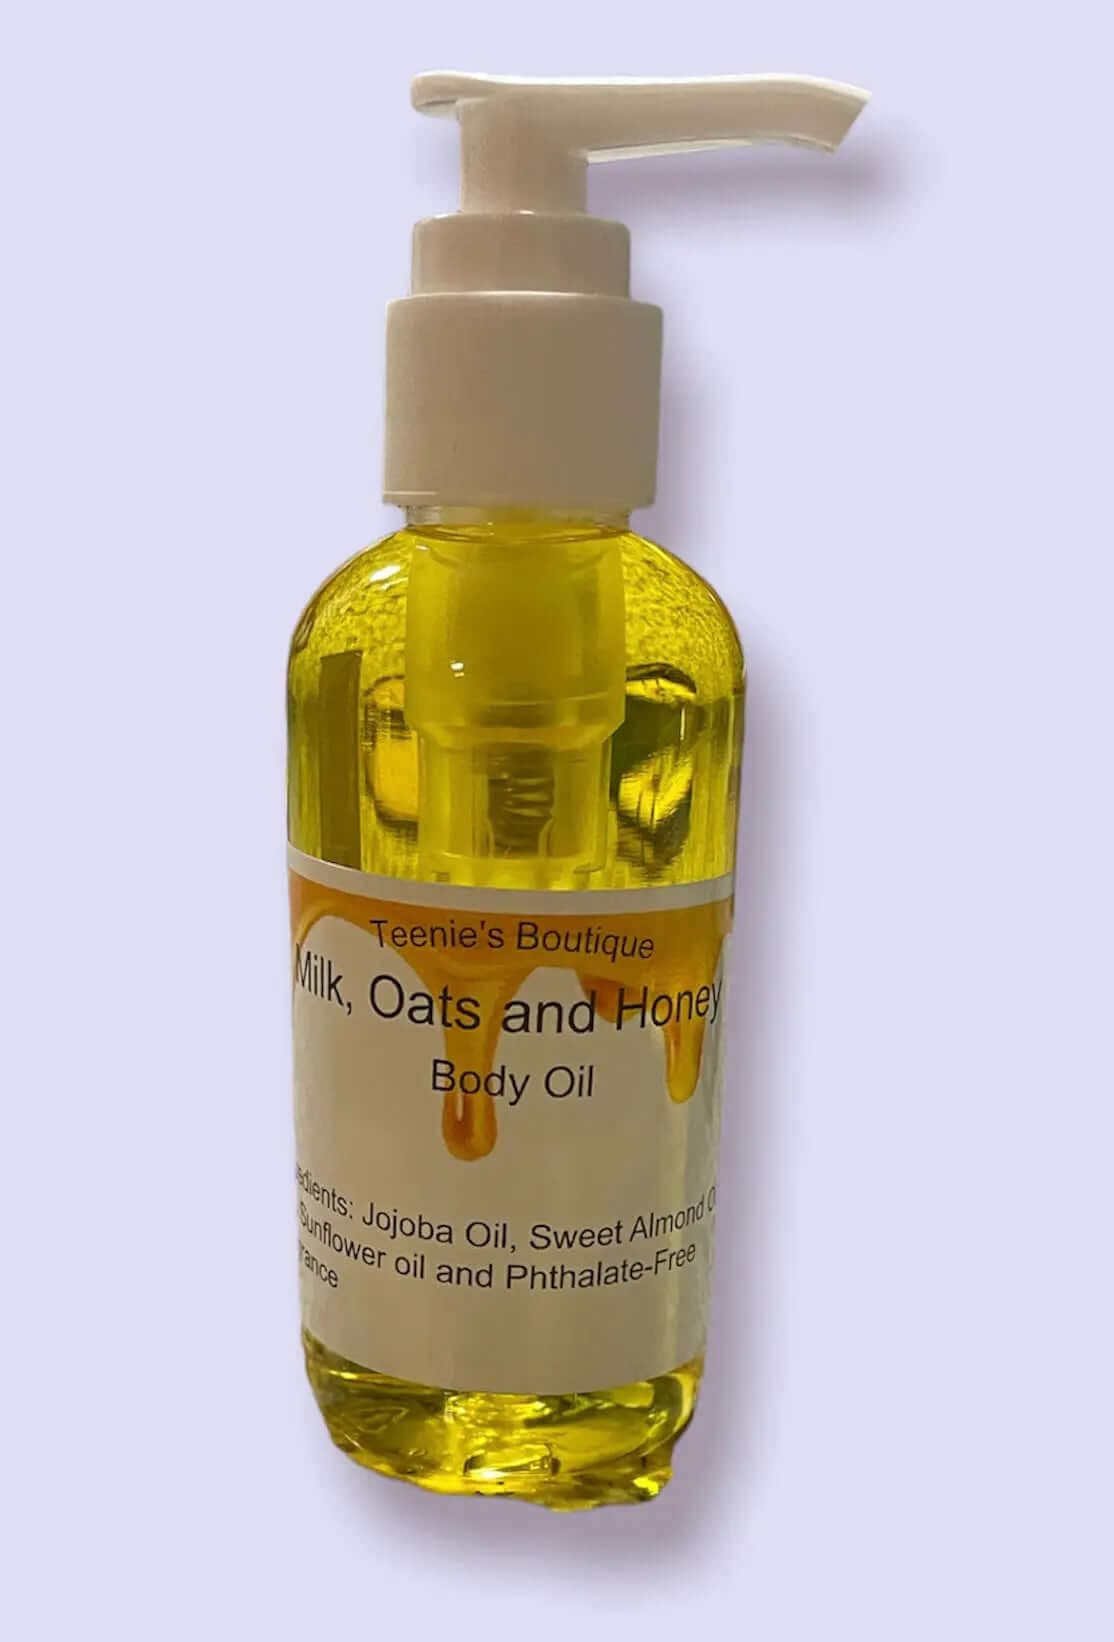 Hydrating Body Oil - Teenies Boutique Milk Oats and Honey Body Oil